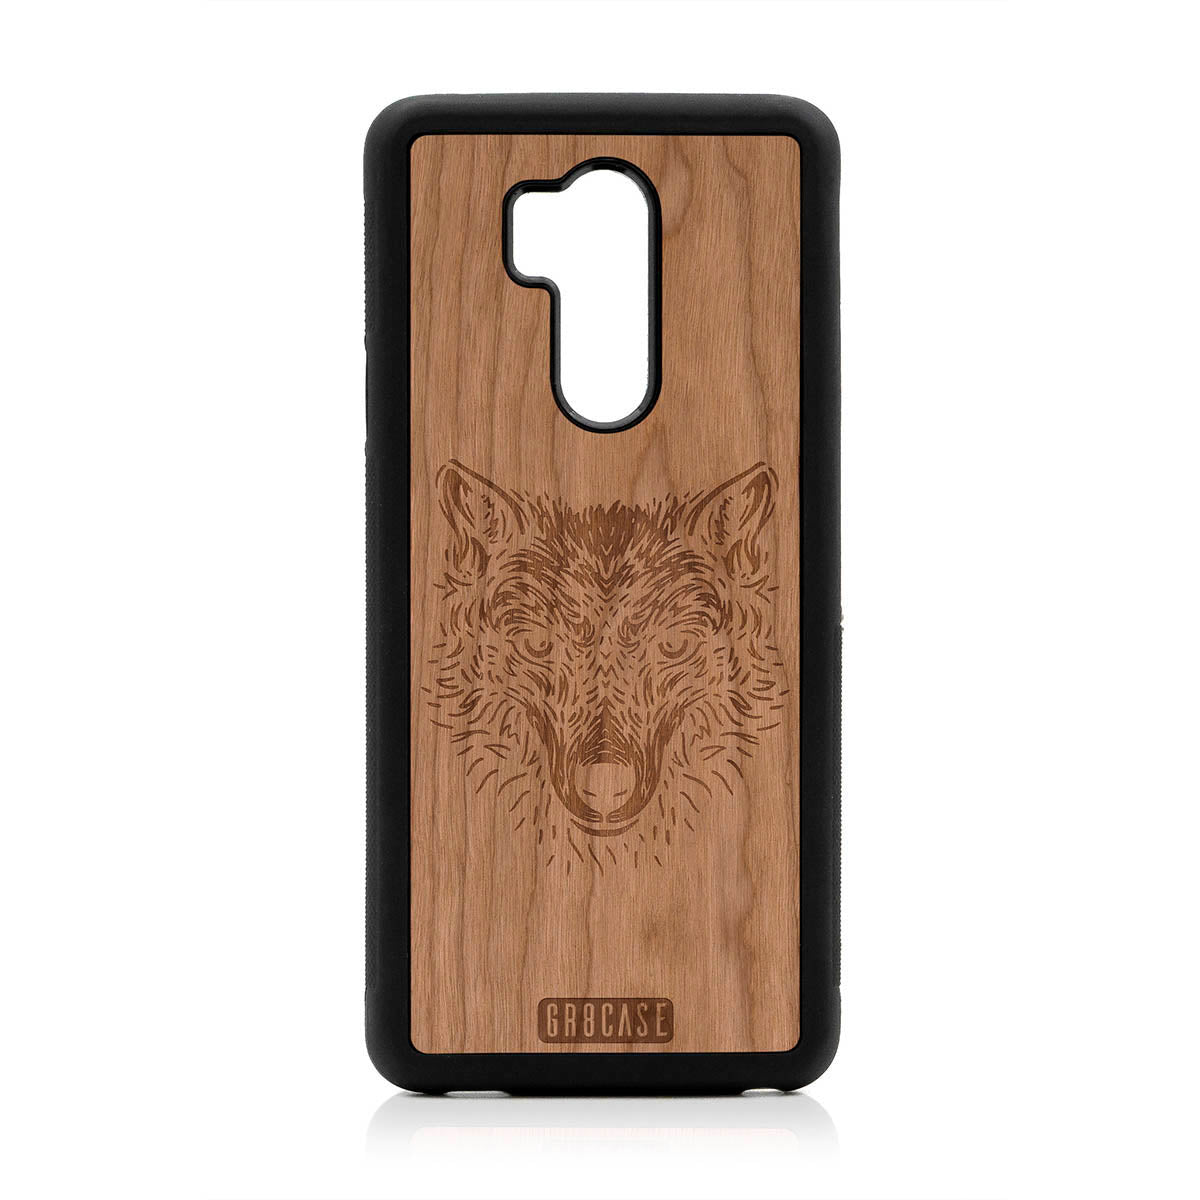 Furry Wolf Design Wood Case For LG G7 ThinQ